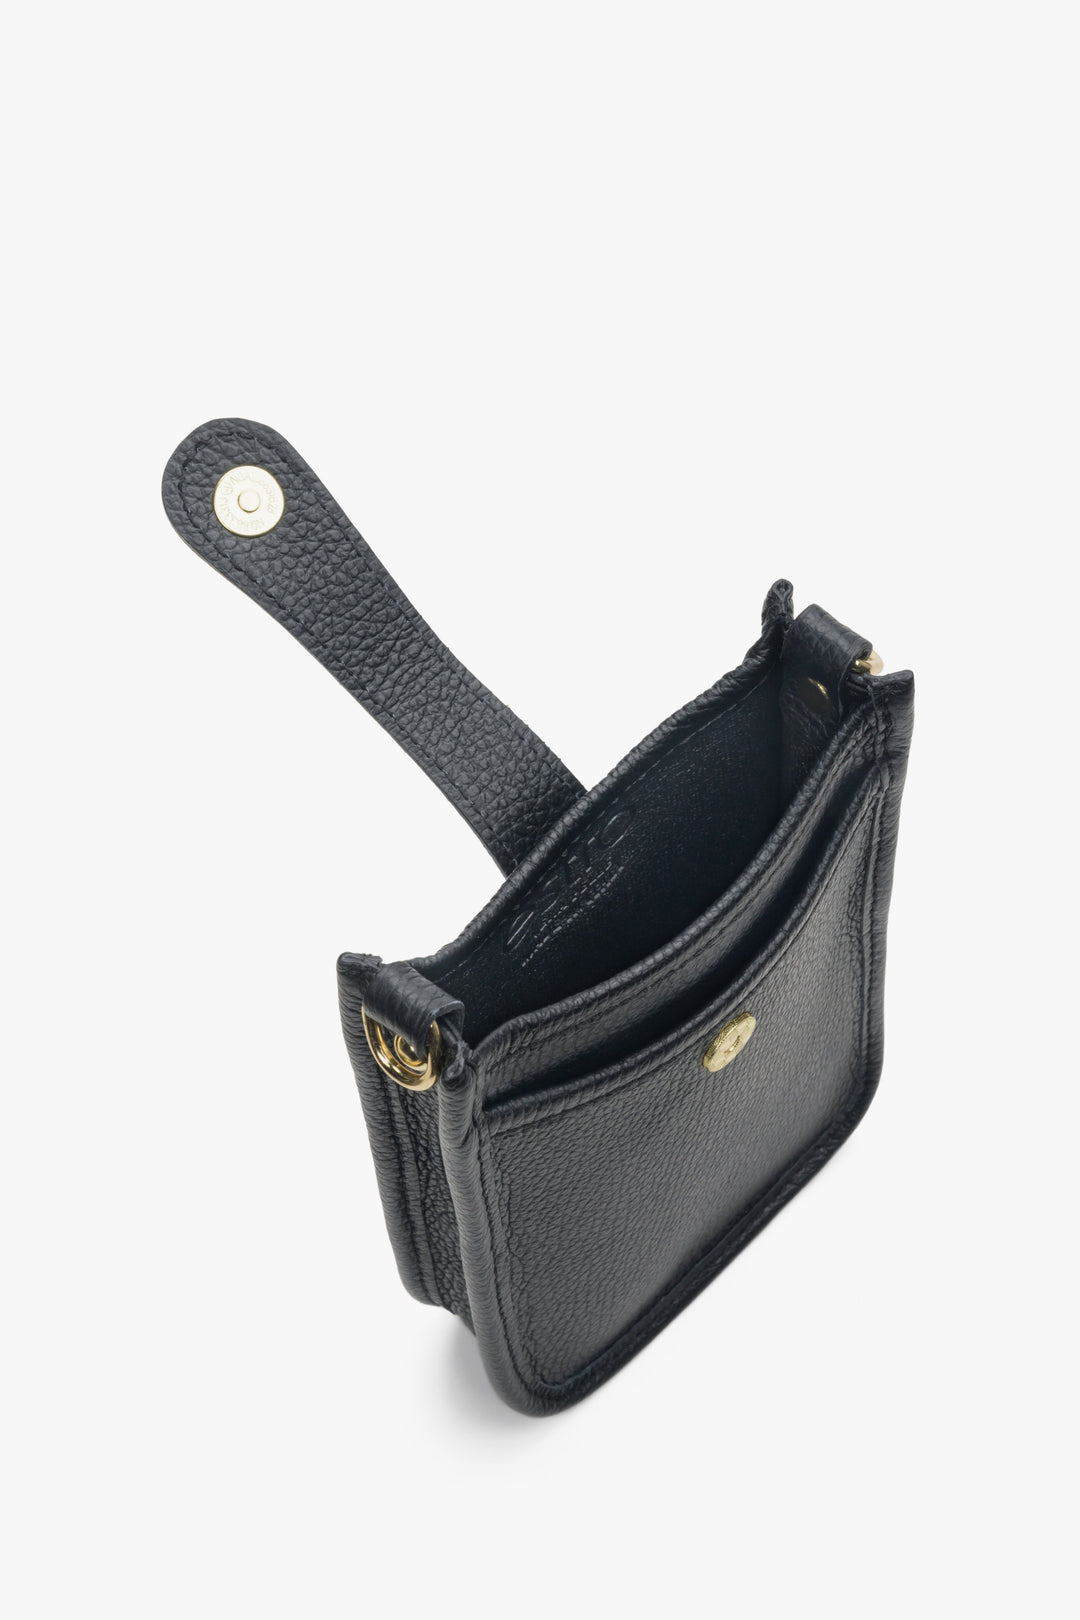 Women's estro black  smartphone purse crafted from genuine leather - close-up of the interior of the product.